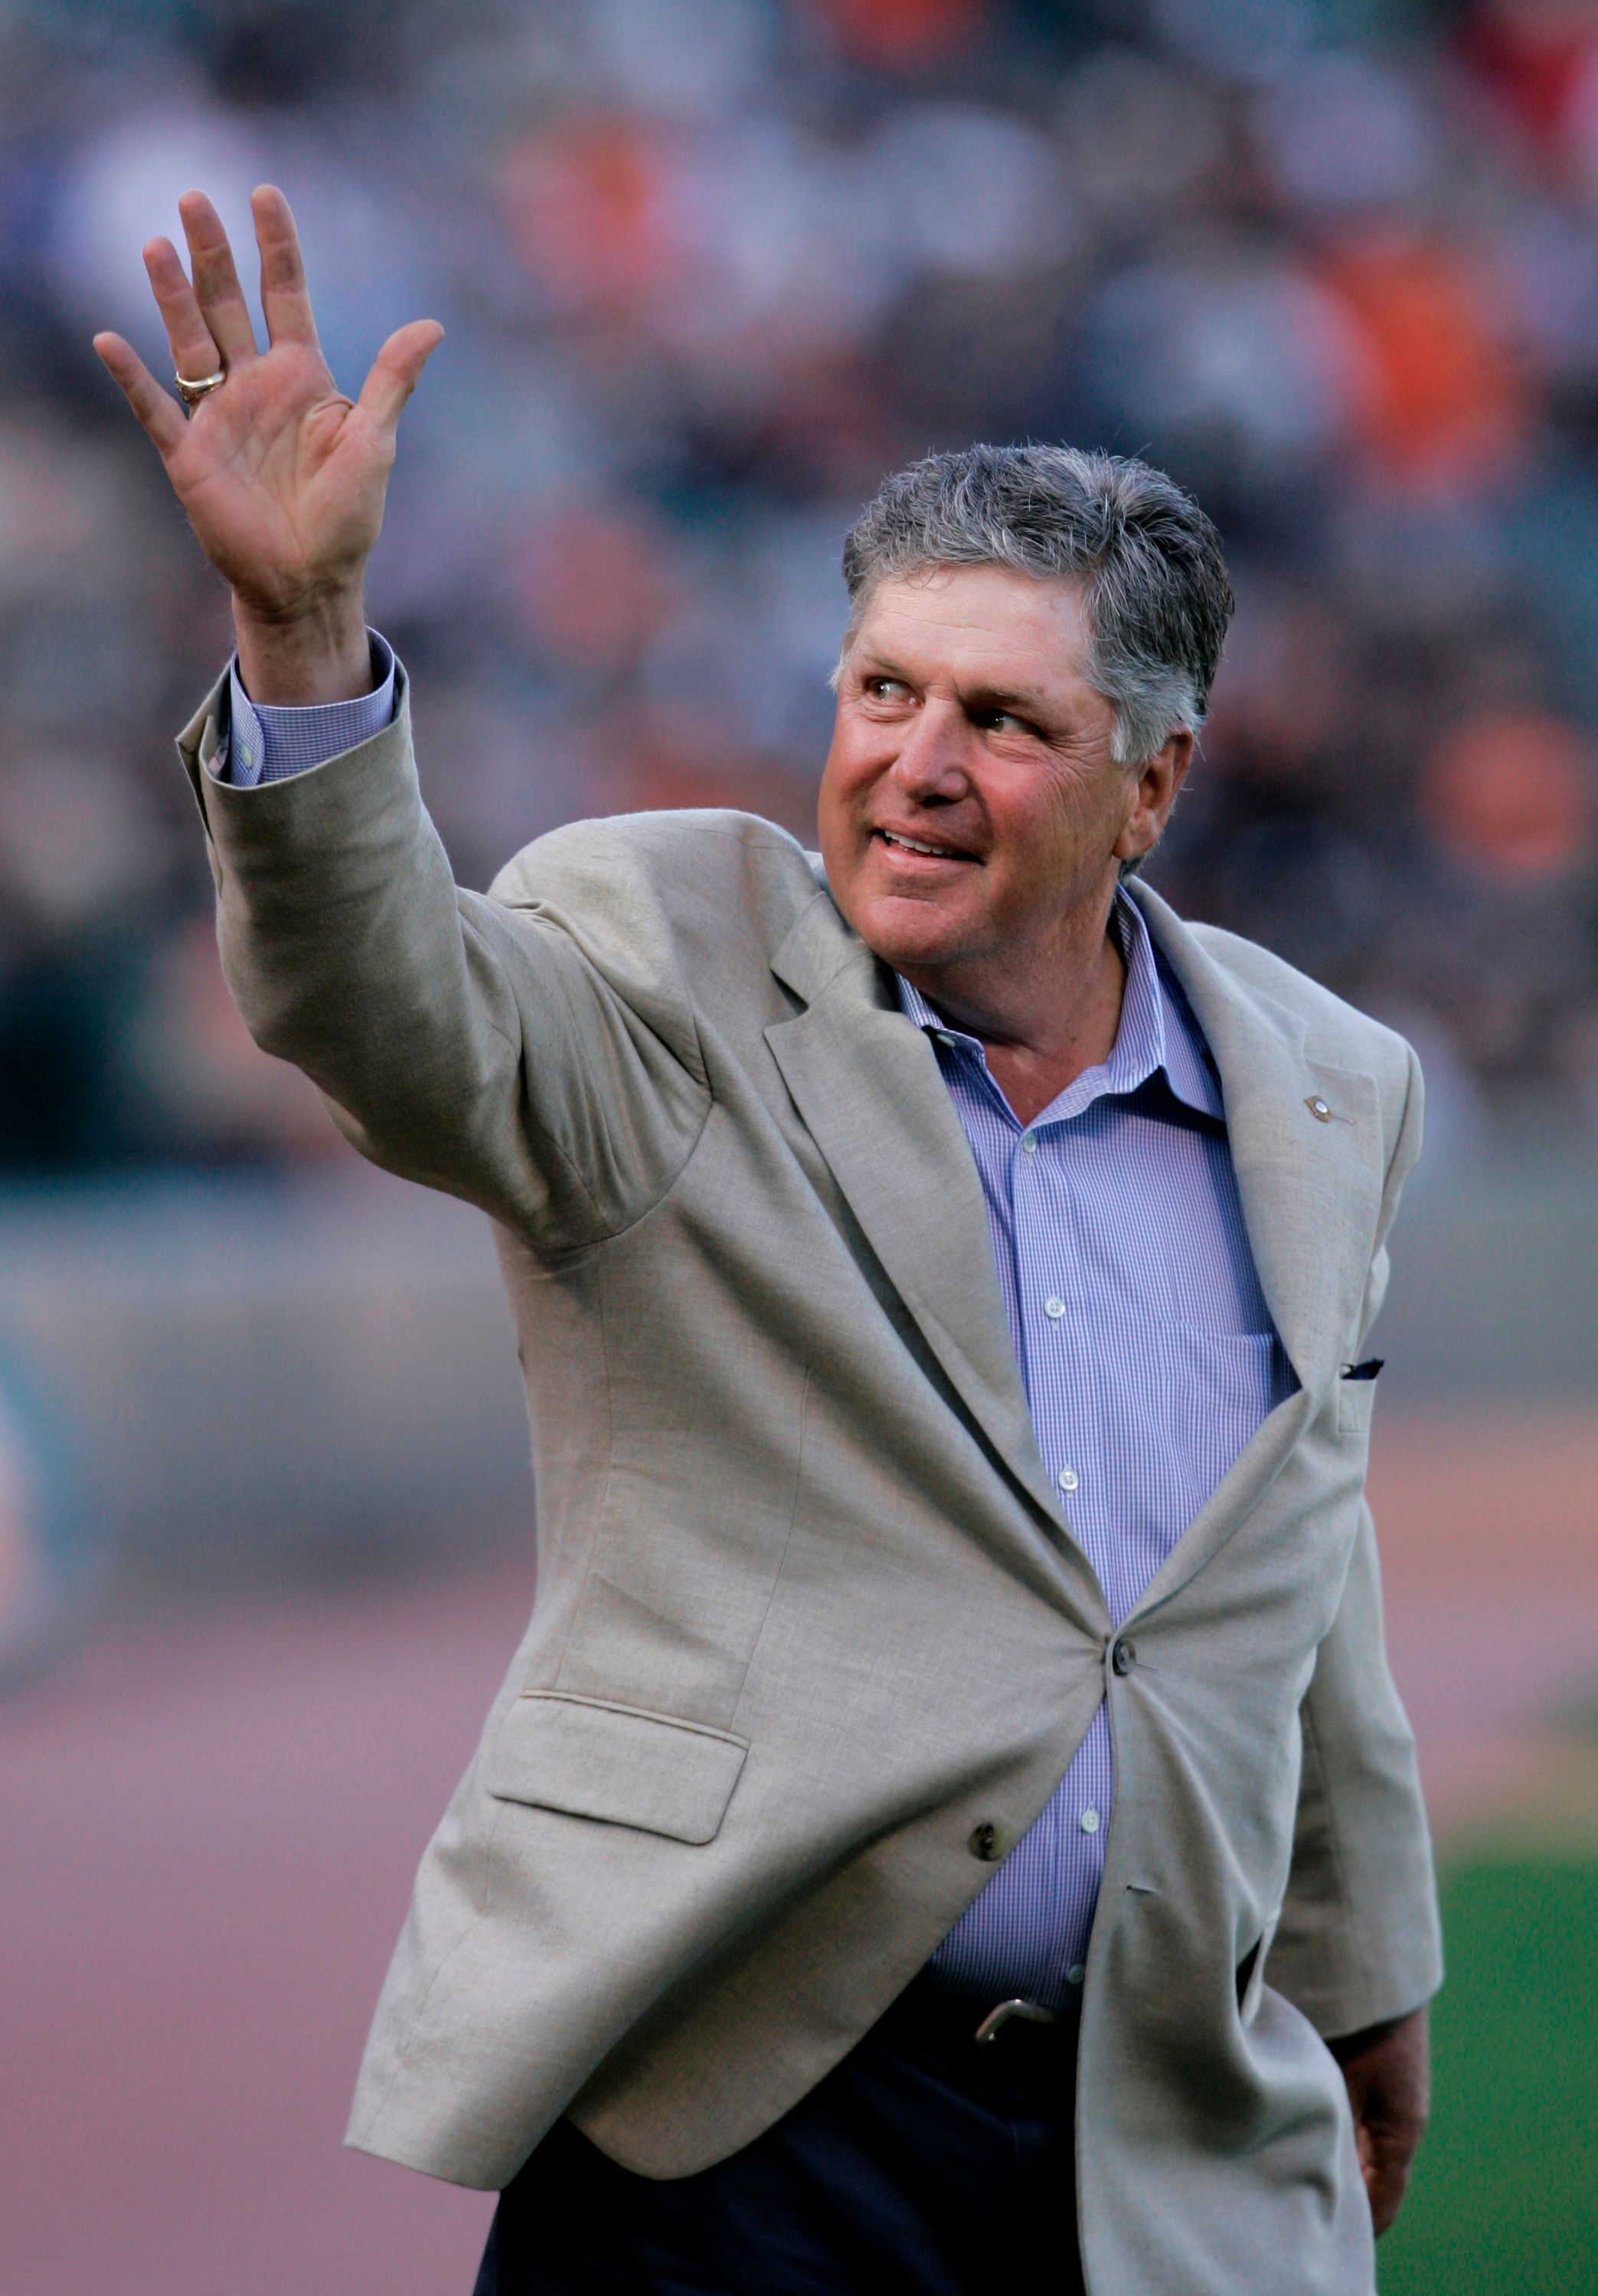 <p>Baseball icon Tom Seaver -- who's widely regarded as one of the greatest Mets players of all time -- died on Aug. 31 at his home in Calistoga, California, from complications of Lewy body dementia and COVID-19, his family confirmed to the Baseball Hall of Fame. The former pitcher, the galvanizing leader of the Miracle Mets 1969 championship team, was 75. "We are heartbroken to share that our beloved husband and father has passed away," wife Nancy and daughters Sarah and Anne told the HOF. "We send our love out to his fans, as we mourn his loss with you."</p>